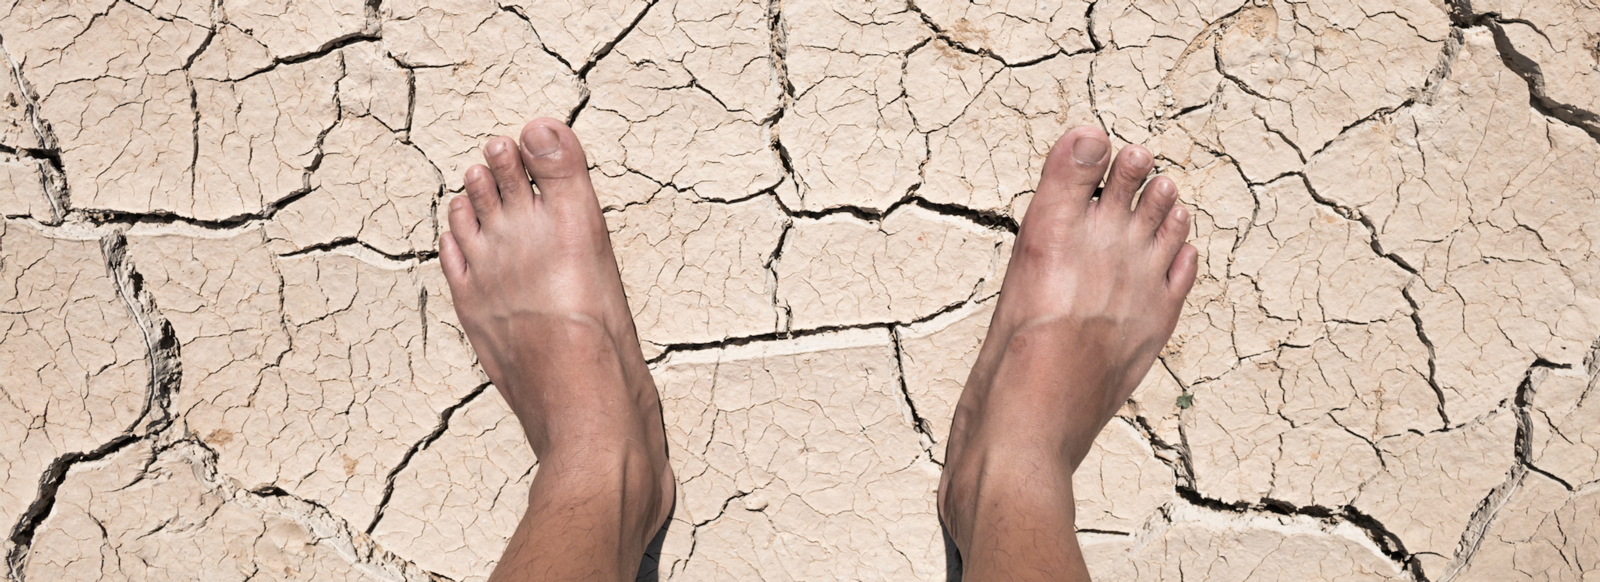 Preventing and Caring for Dry Feet | Advanced Foot & Ankle